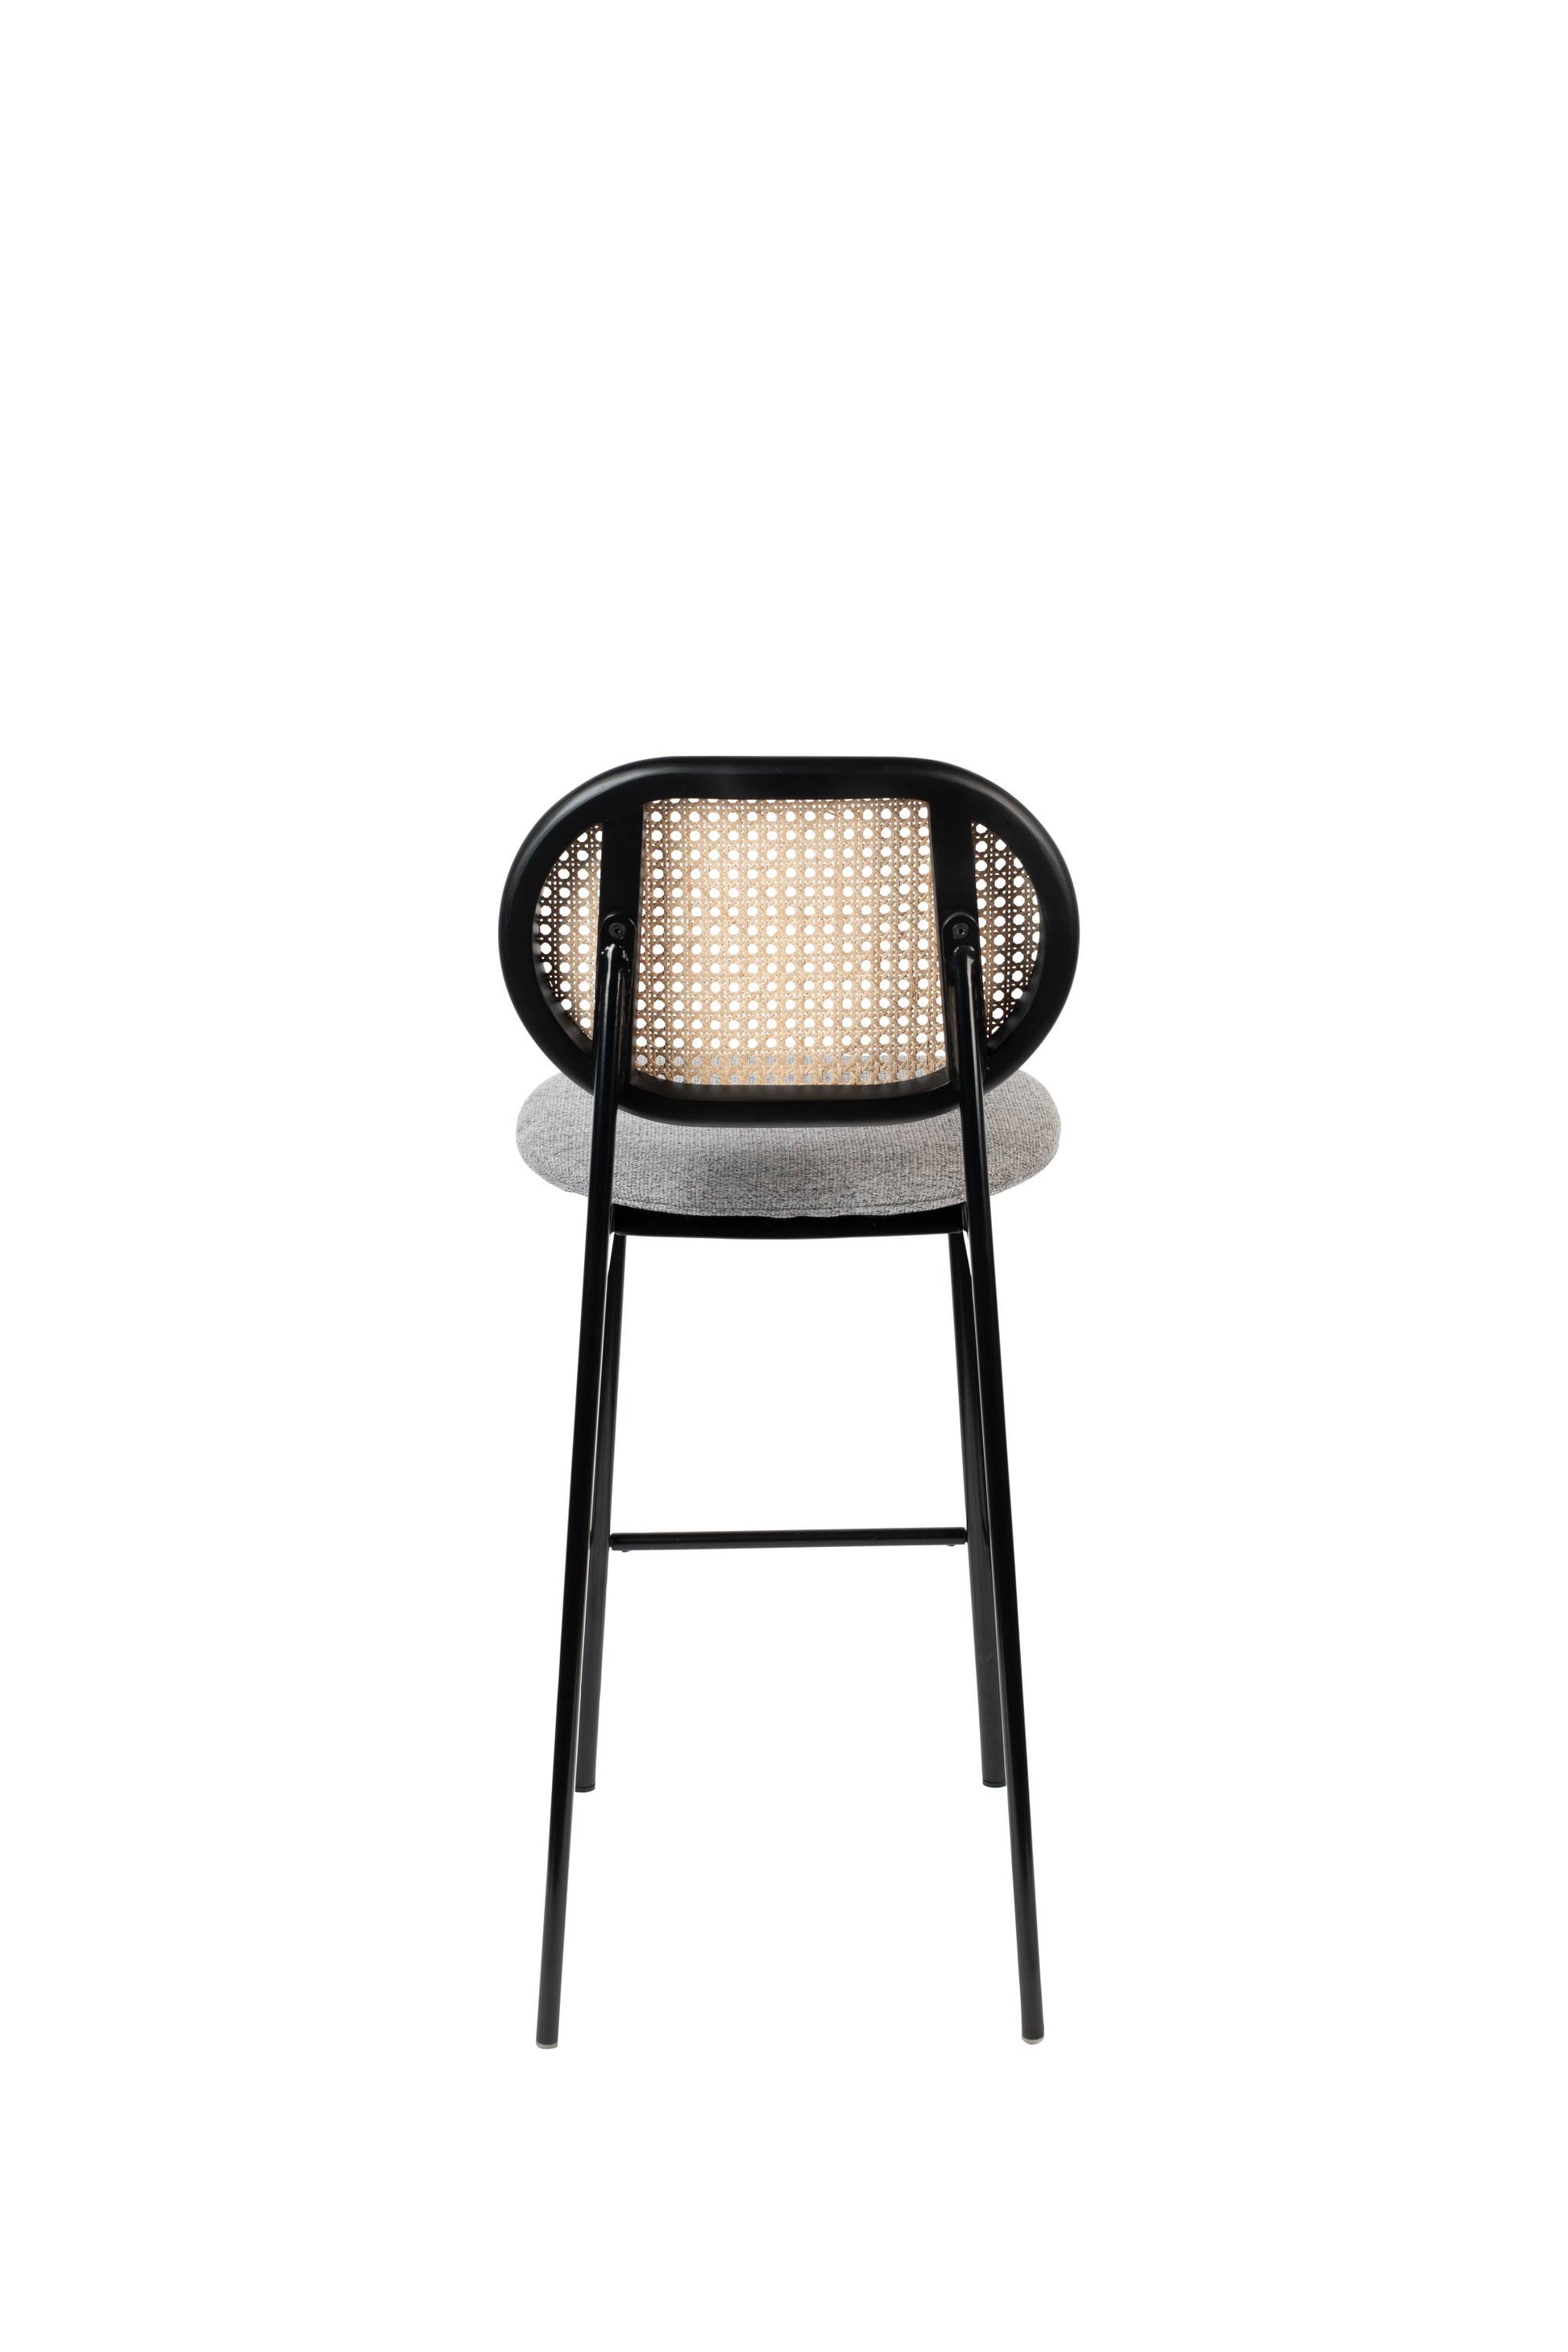 Zuiver | COUNTER STOOL SPIKE NATURAL/GREY Default Title